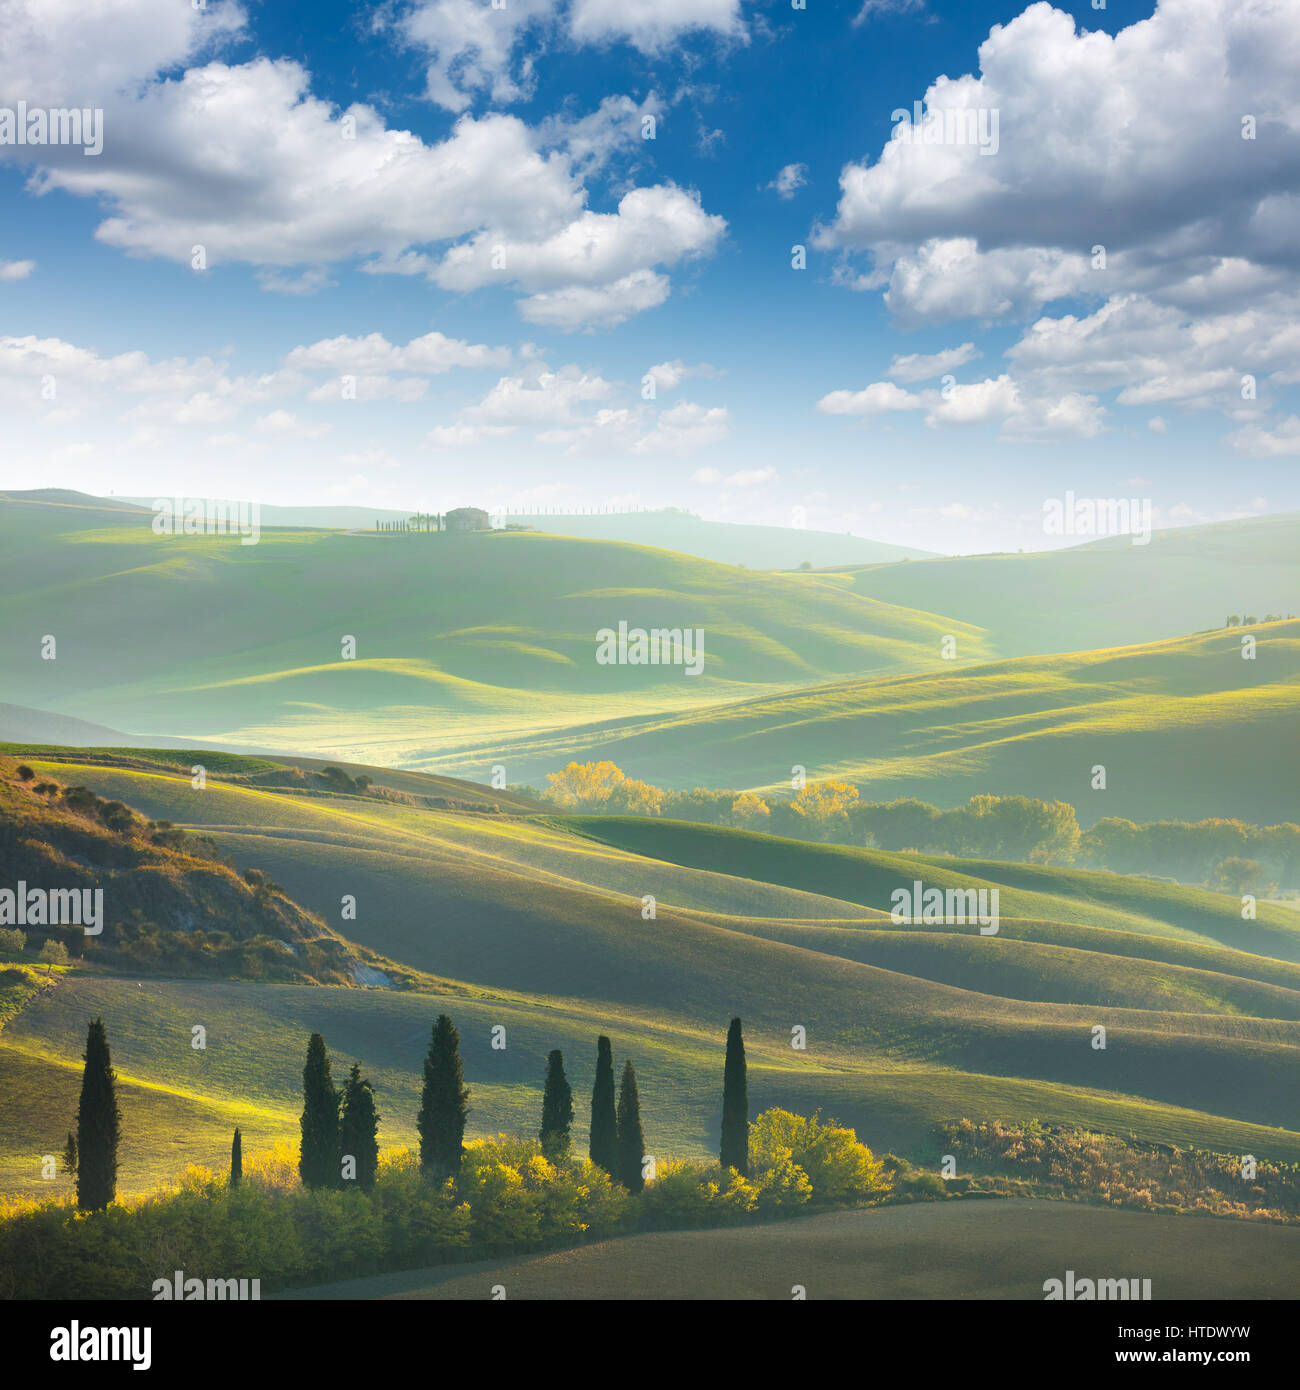 Fresh Green tuscany landscape in spring time - wave hills, cypresses trees, green grass and beautiful blue sky. Tuscany, Italy, Europe Stock Photo